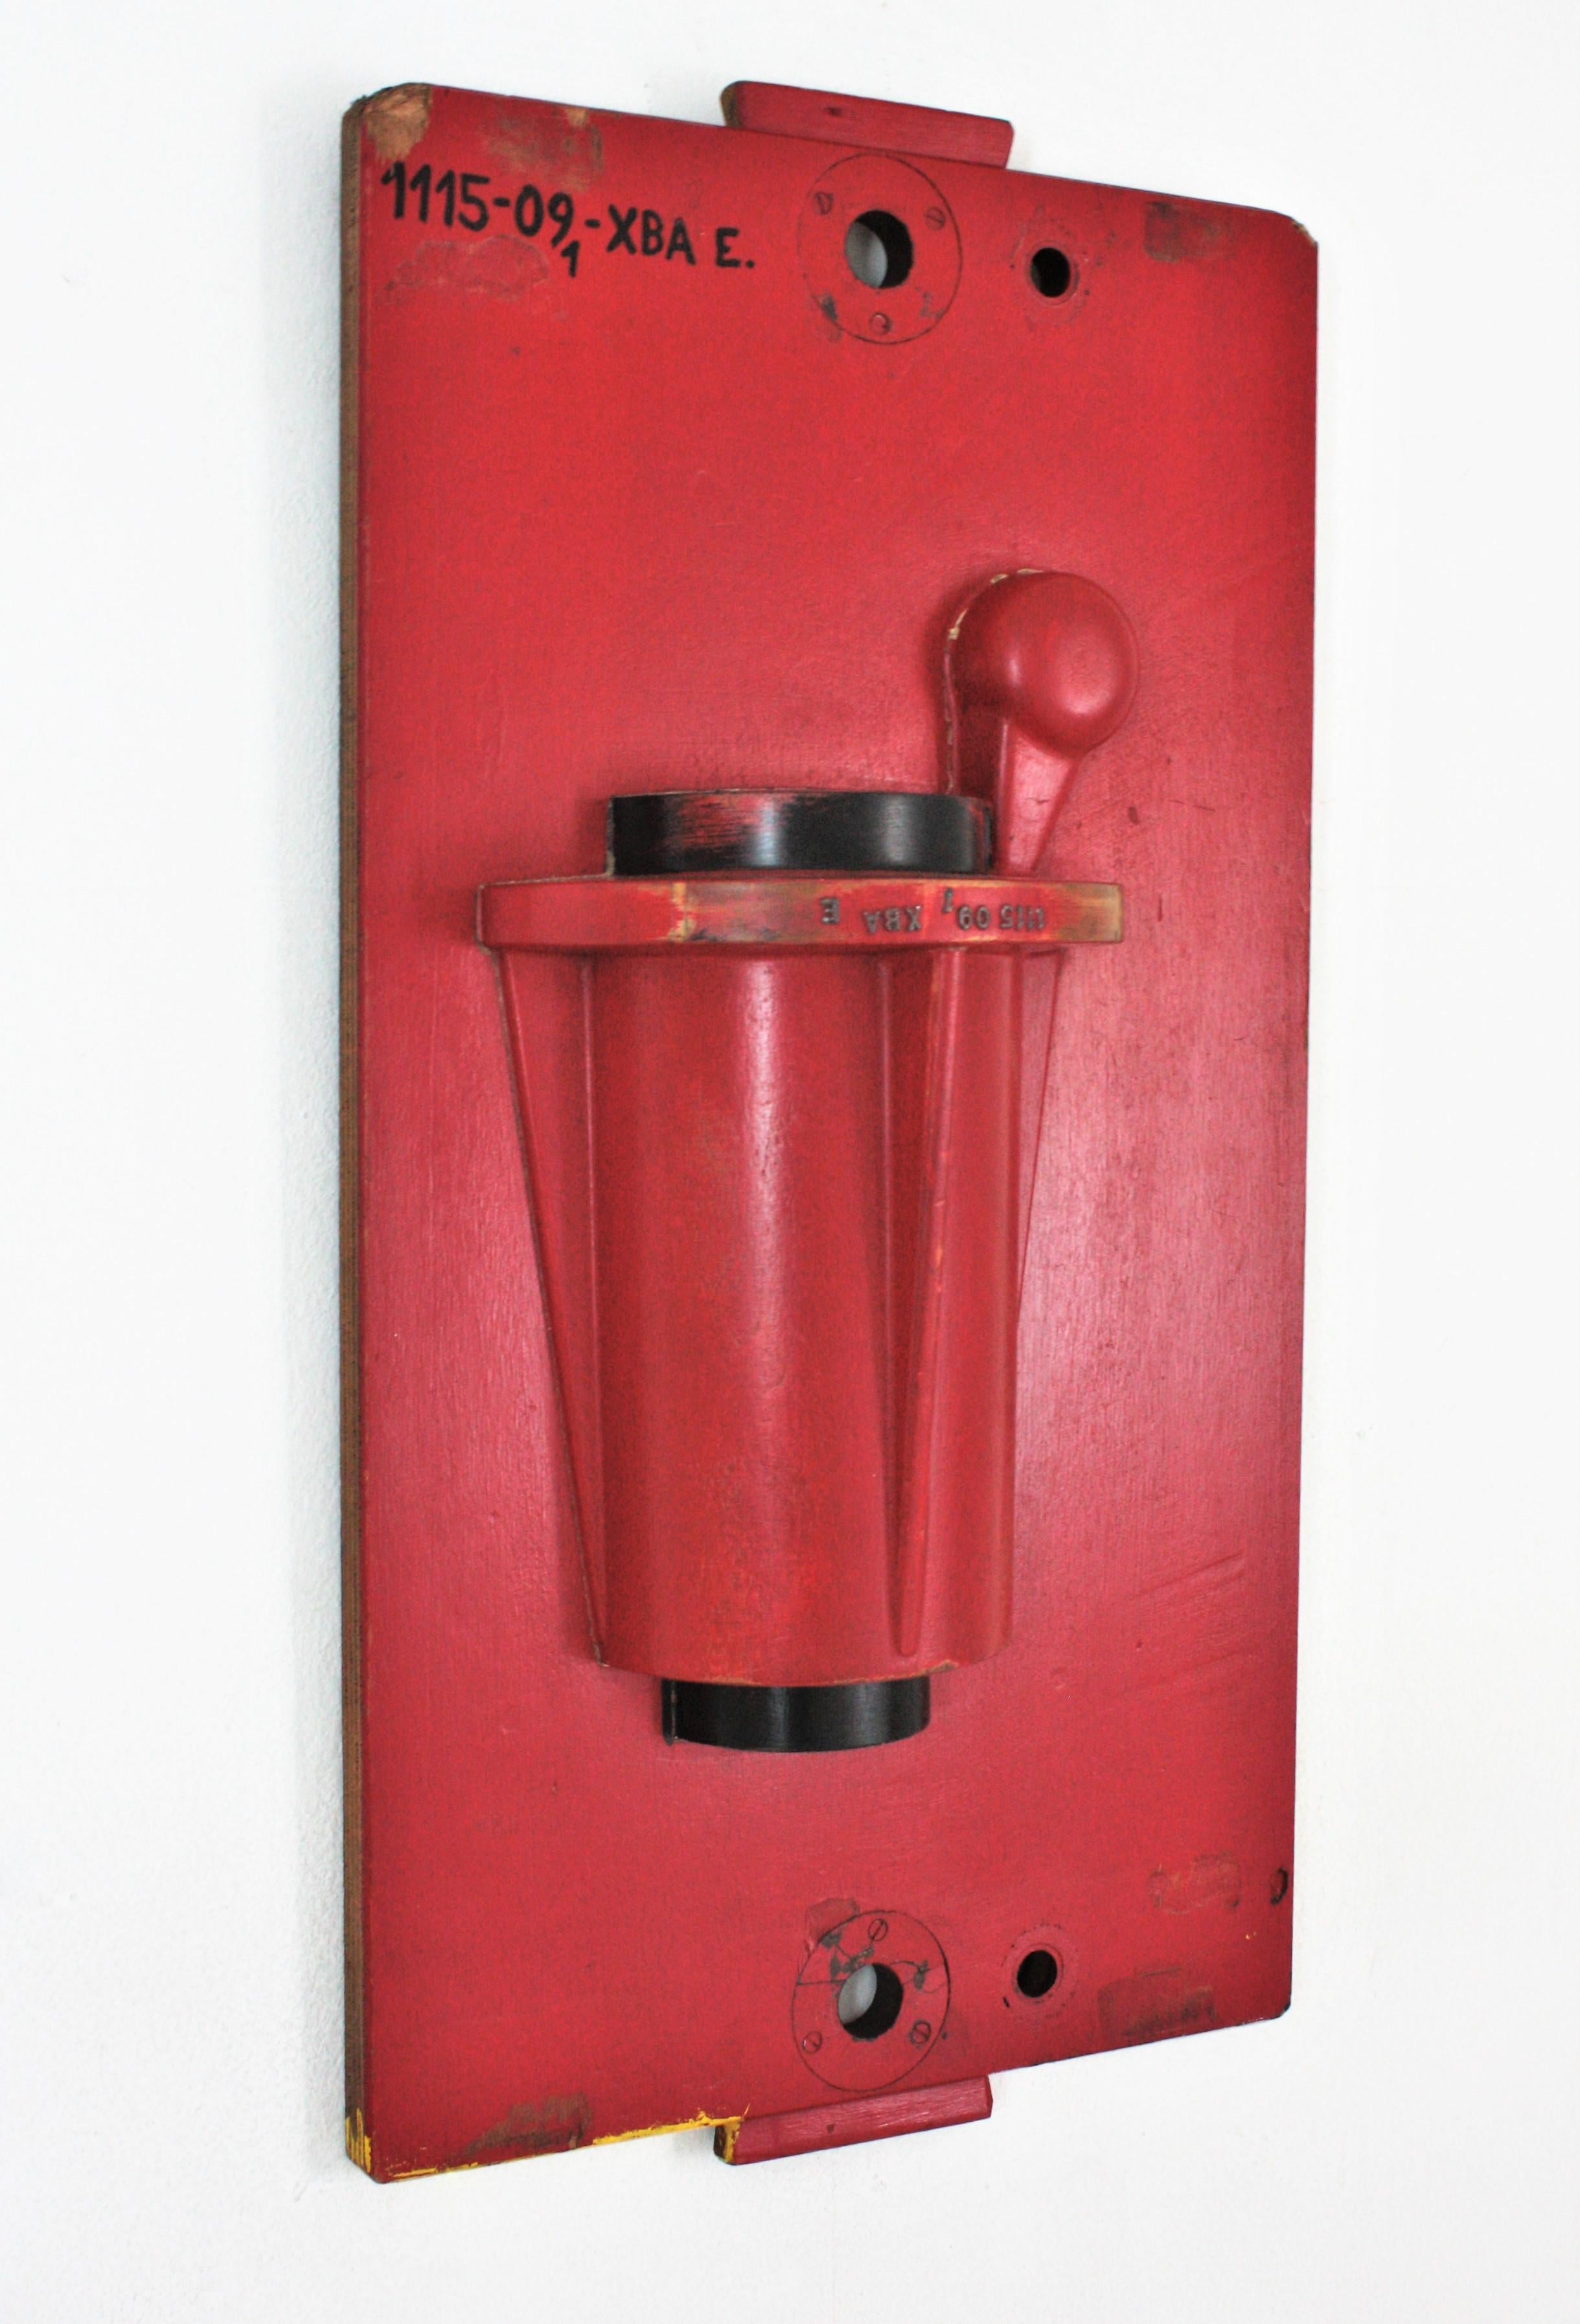 Wood foundry mold as wall sculpture, Spain, 1940s.
Black and red original colors. 
Measures: 82 cm H x 43,5 cm W x 16 cm D // 32,28 in H x 17,12 in W x 6,29 in D
This piece will be a nice addition to any industrial decoration but it will work